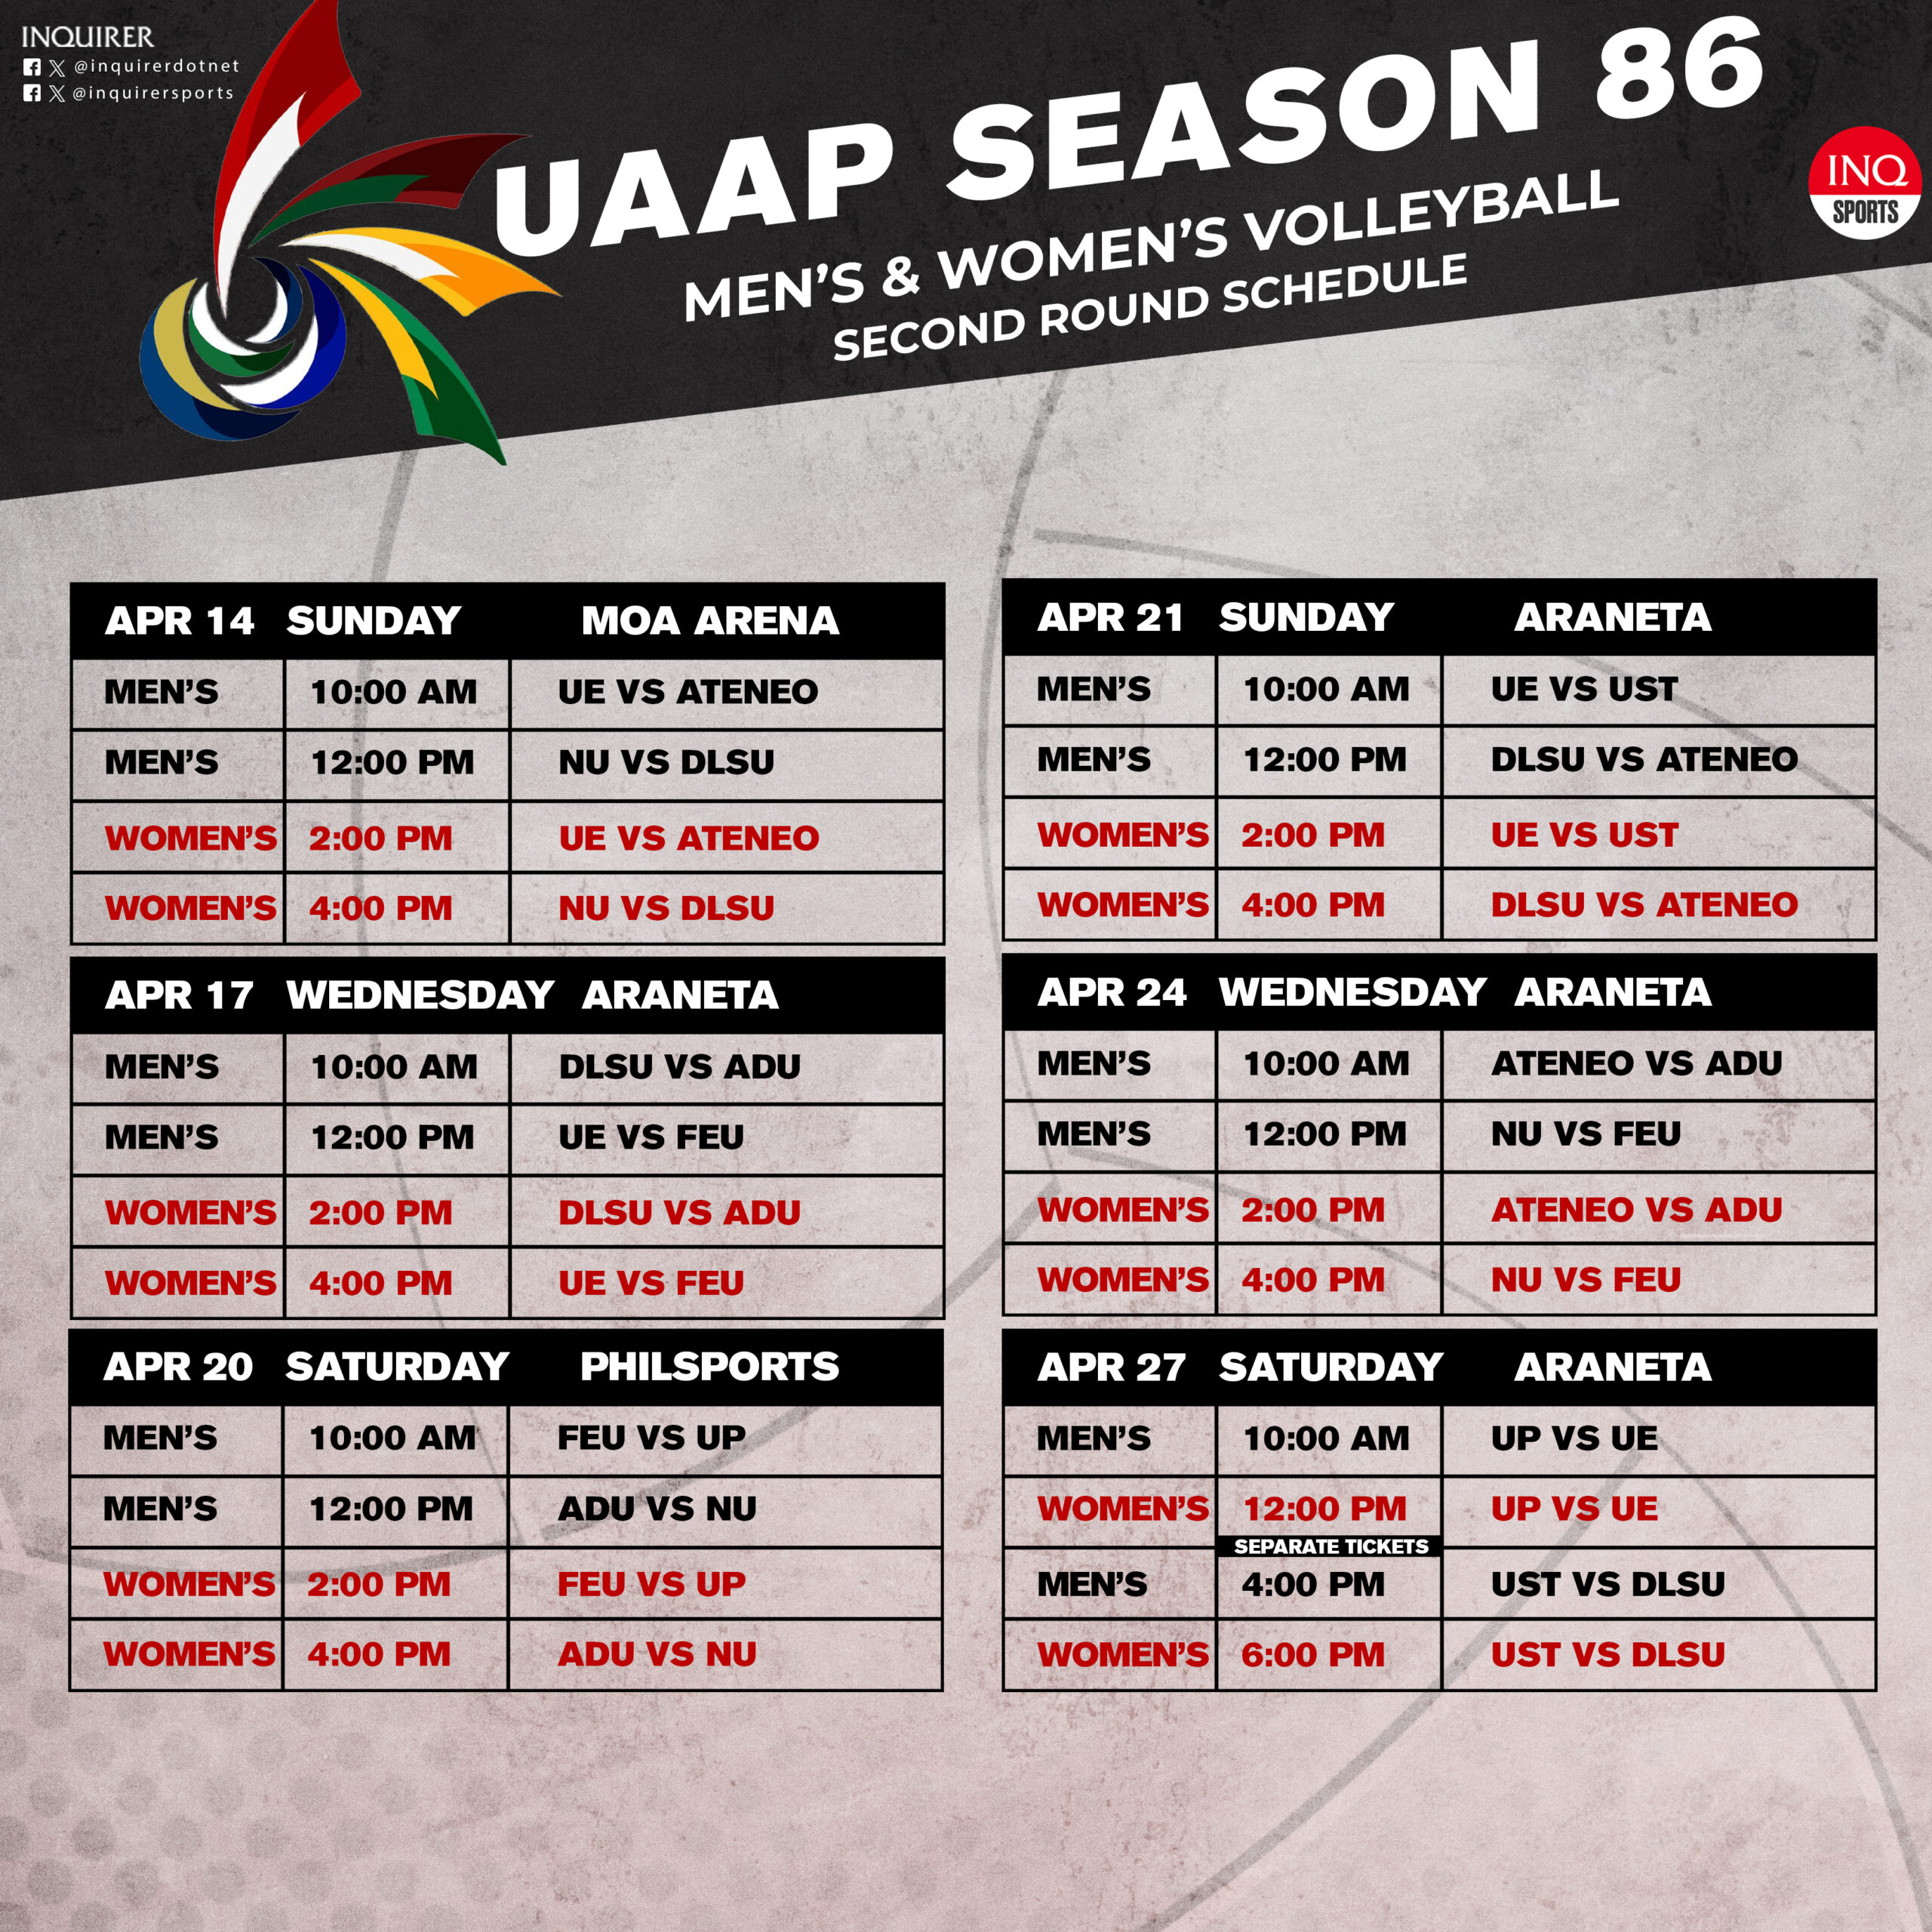 UAAP Season 86 men's and women's volleyball second-round schedule (full)